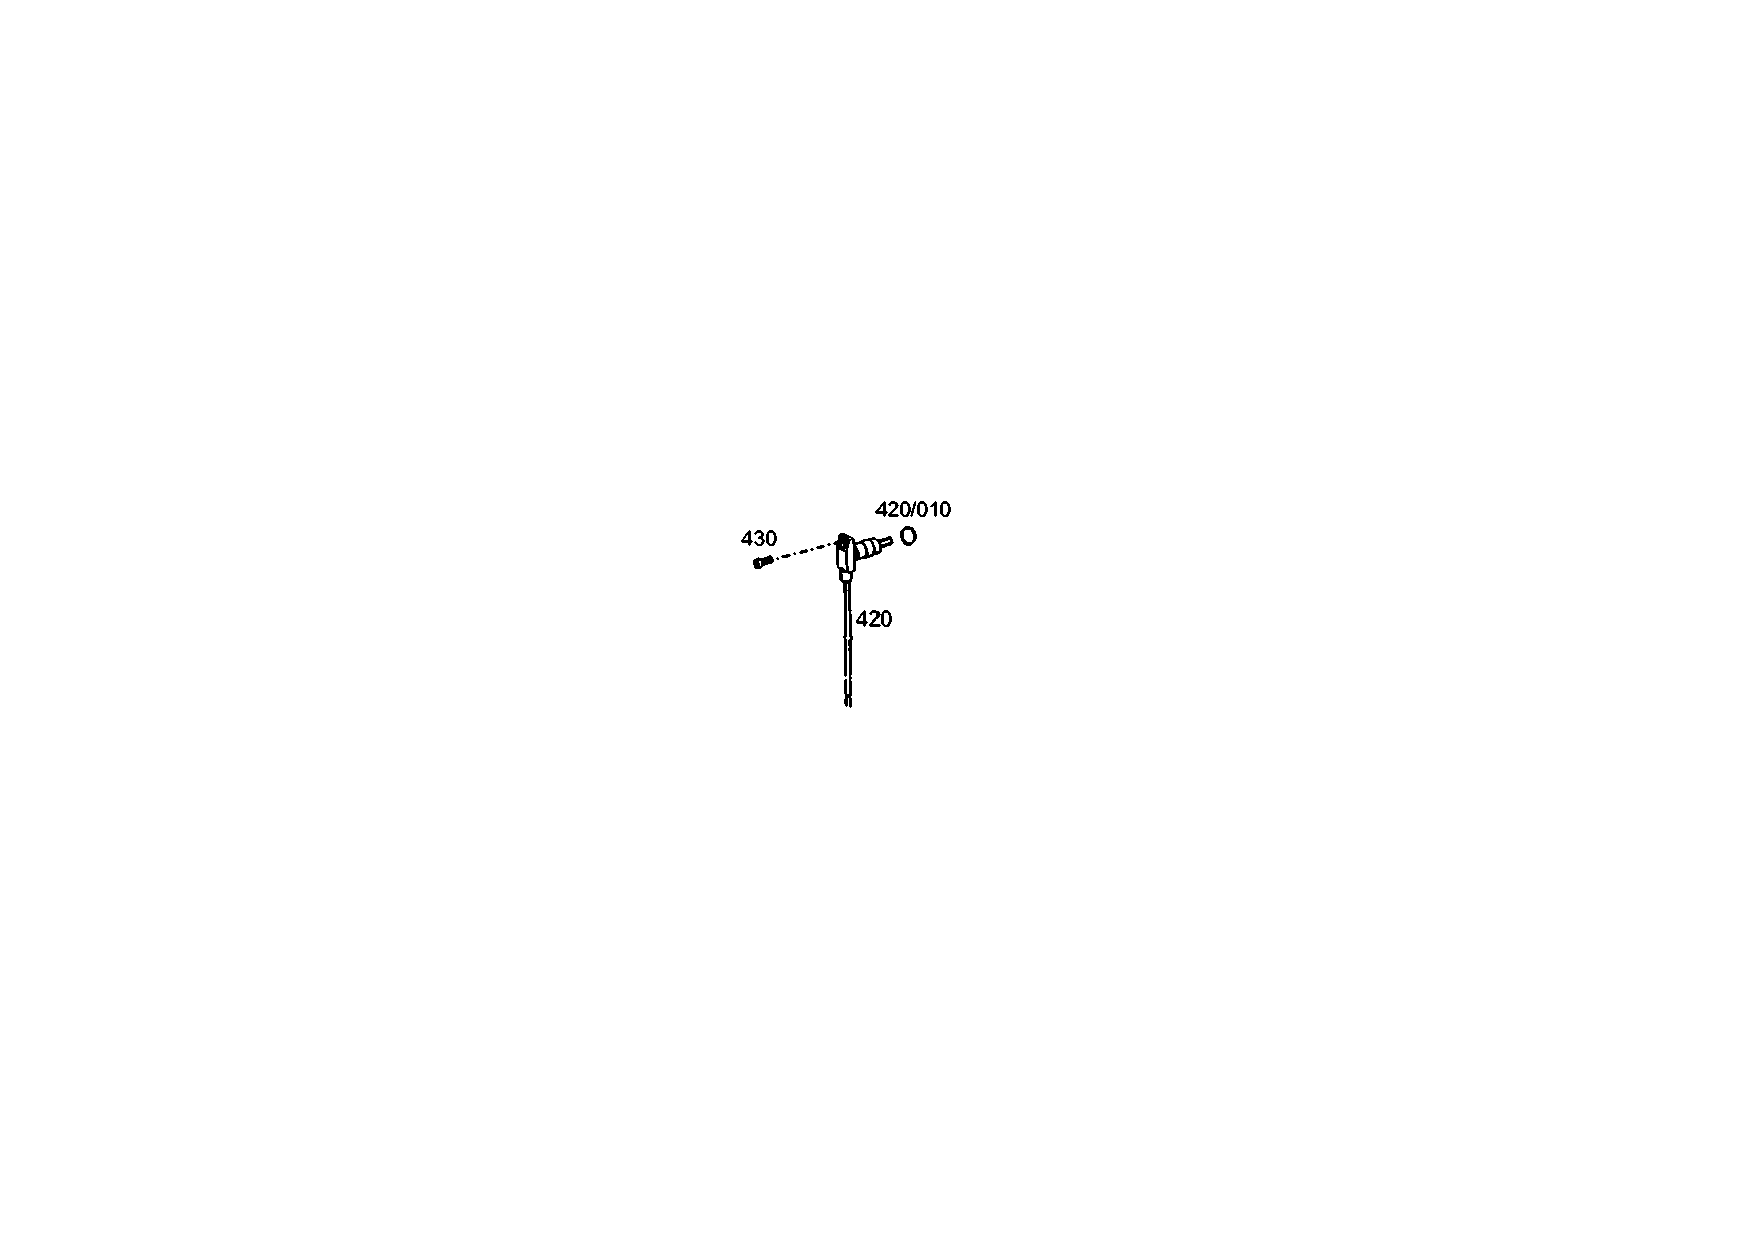 drawing for PETER RENZ SP. Z O. O. 072145700 - REVOLUTION COUNTER (figure 1)